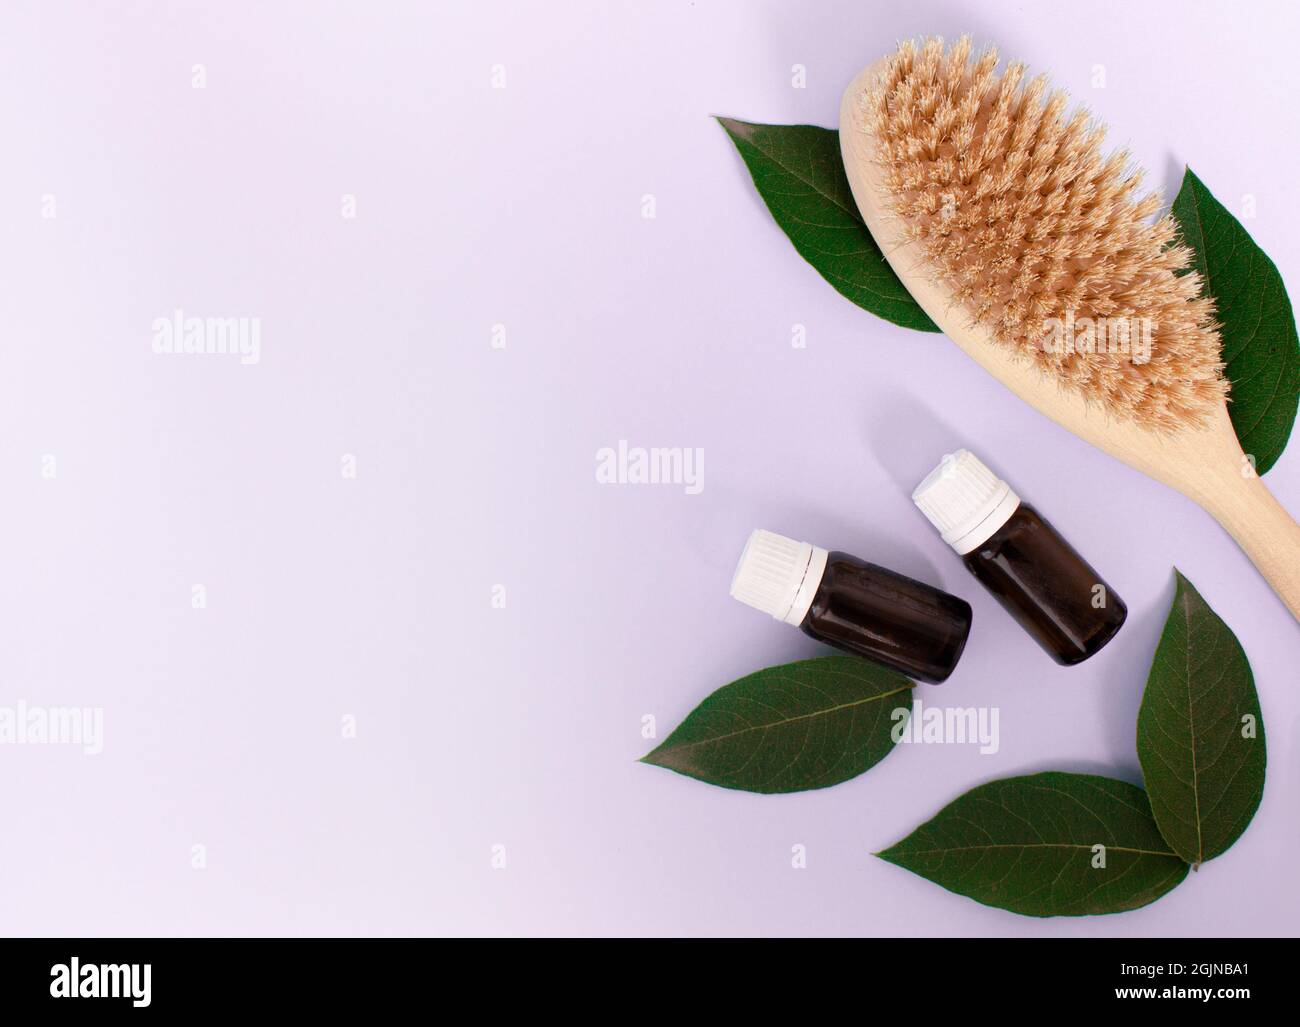 wooden brush for anti-cellulite body massage, and cosmetic bottle on purple light background. Body care concept Stock Photo